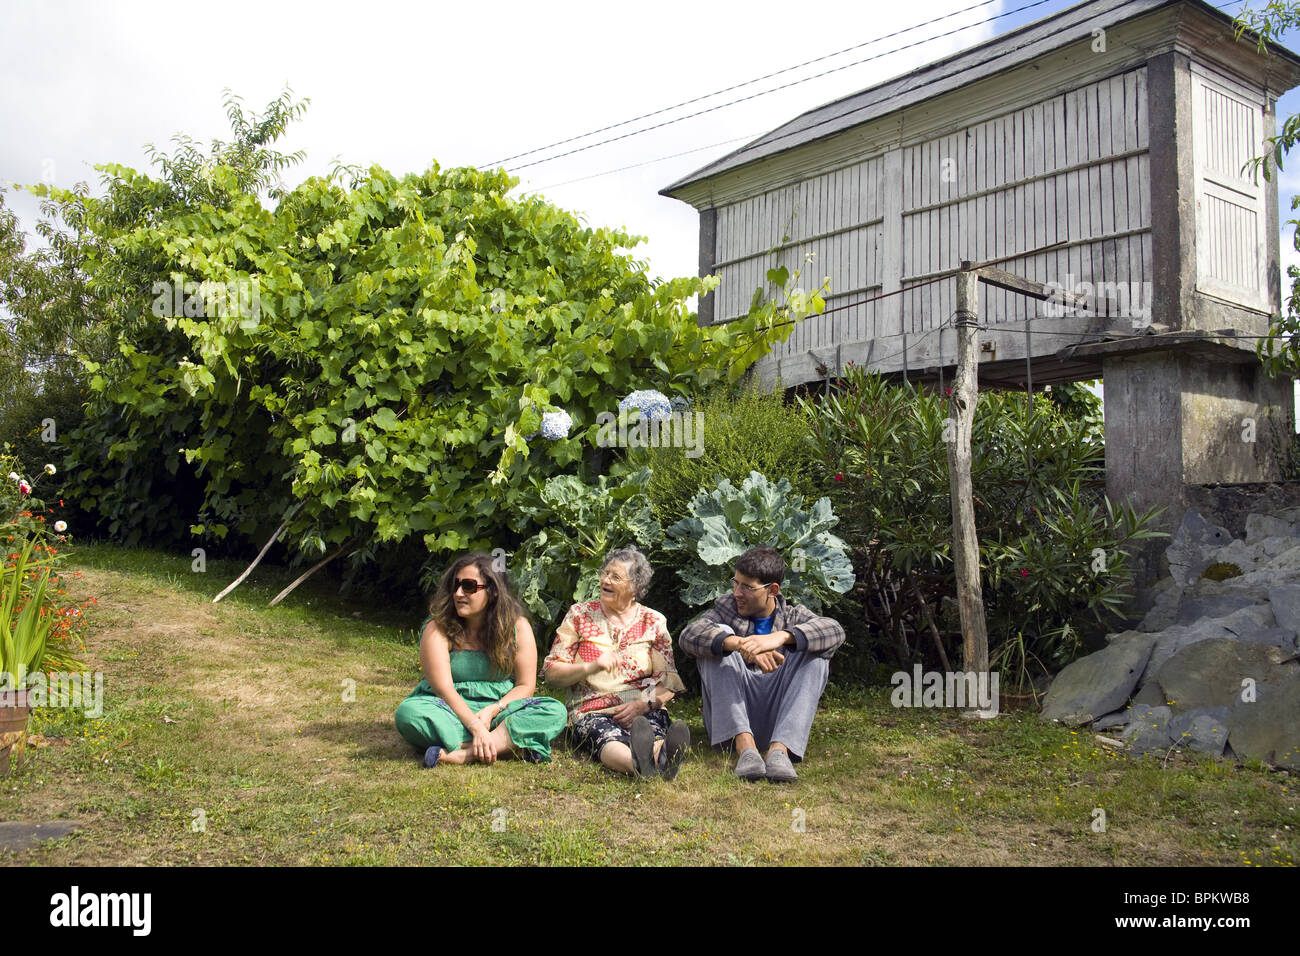 Three people seated relaxed in the backyard of a traditional galician country house Stock Photo